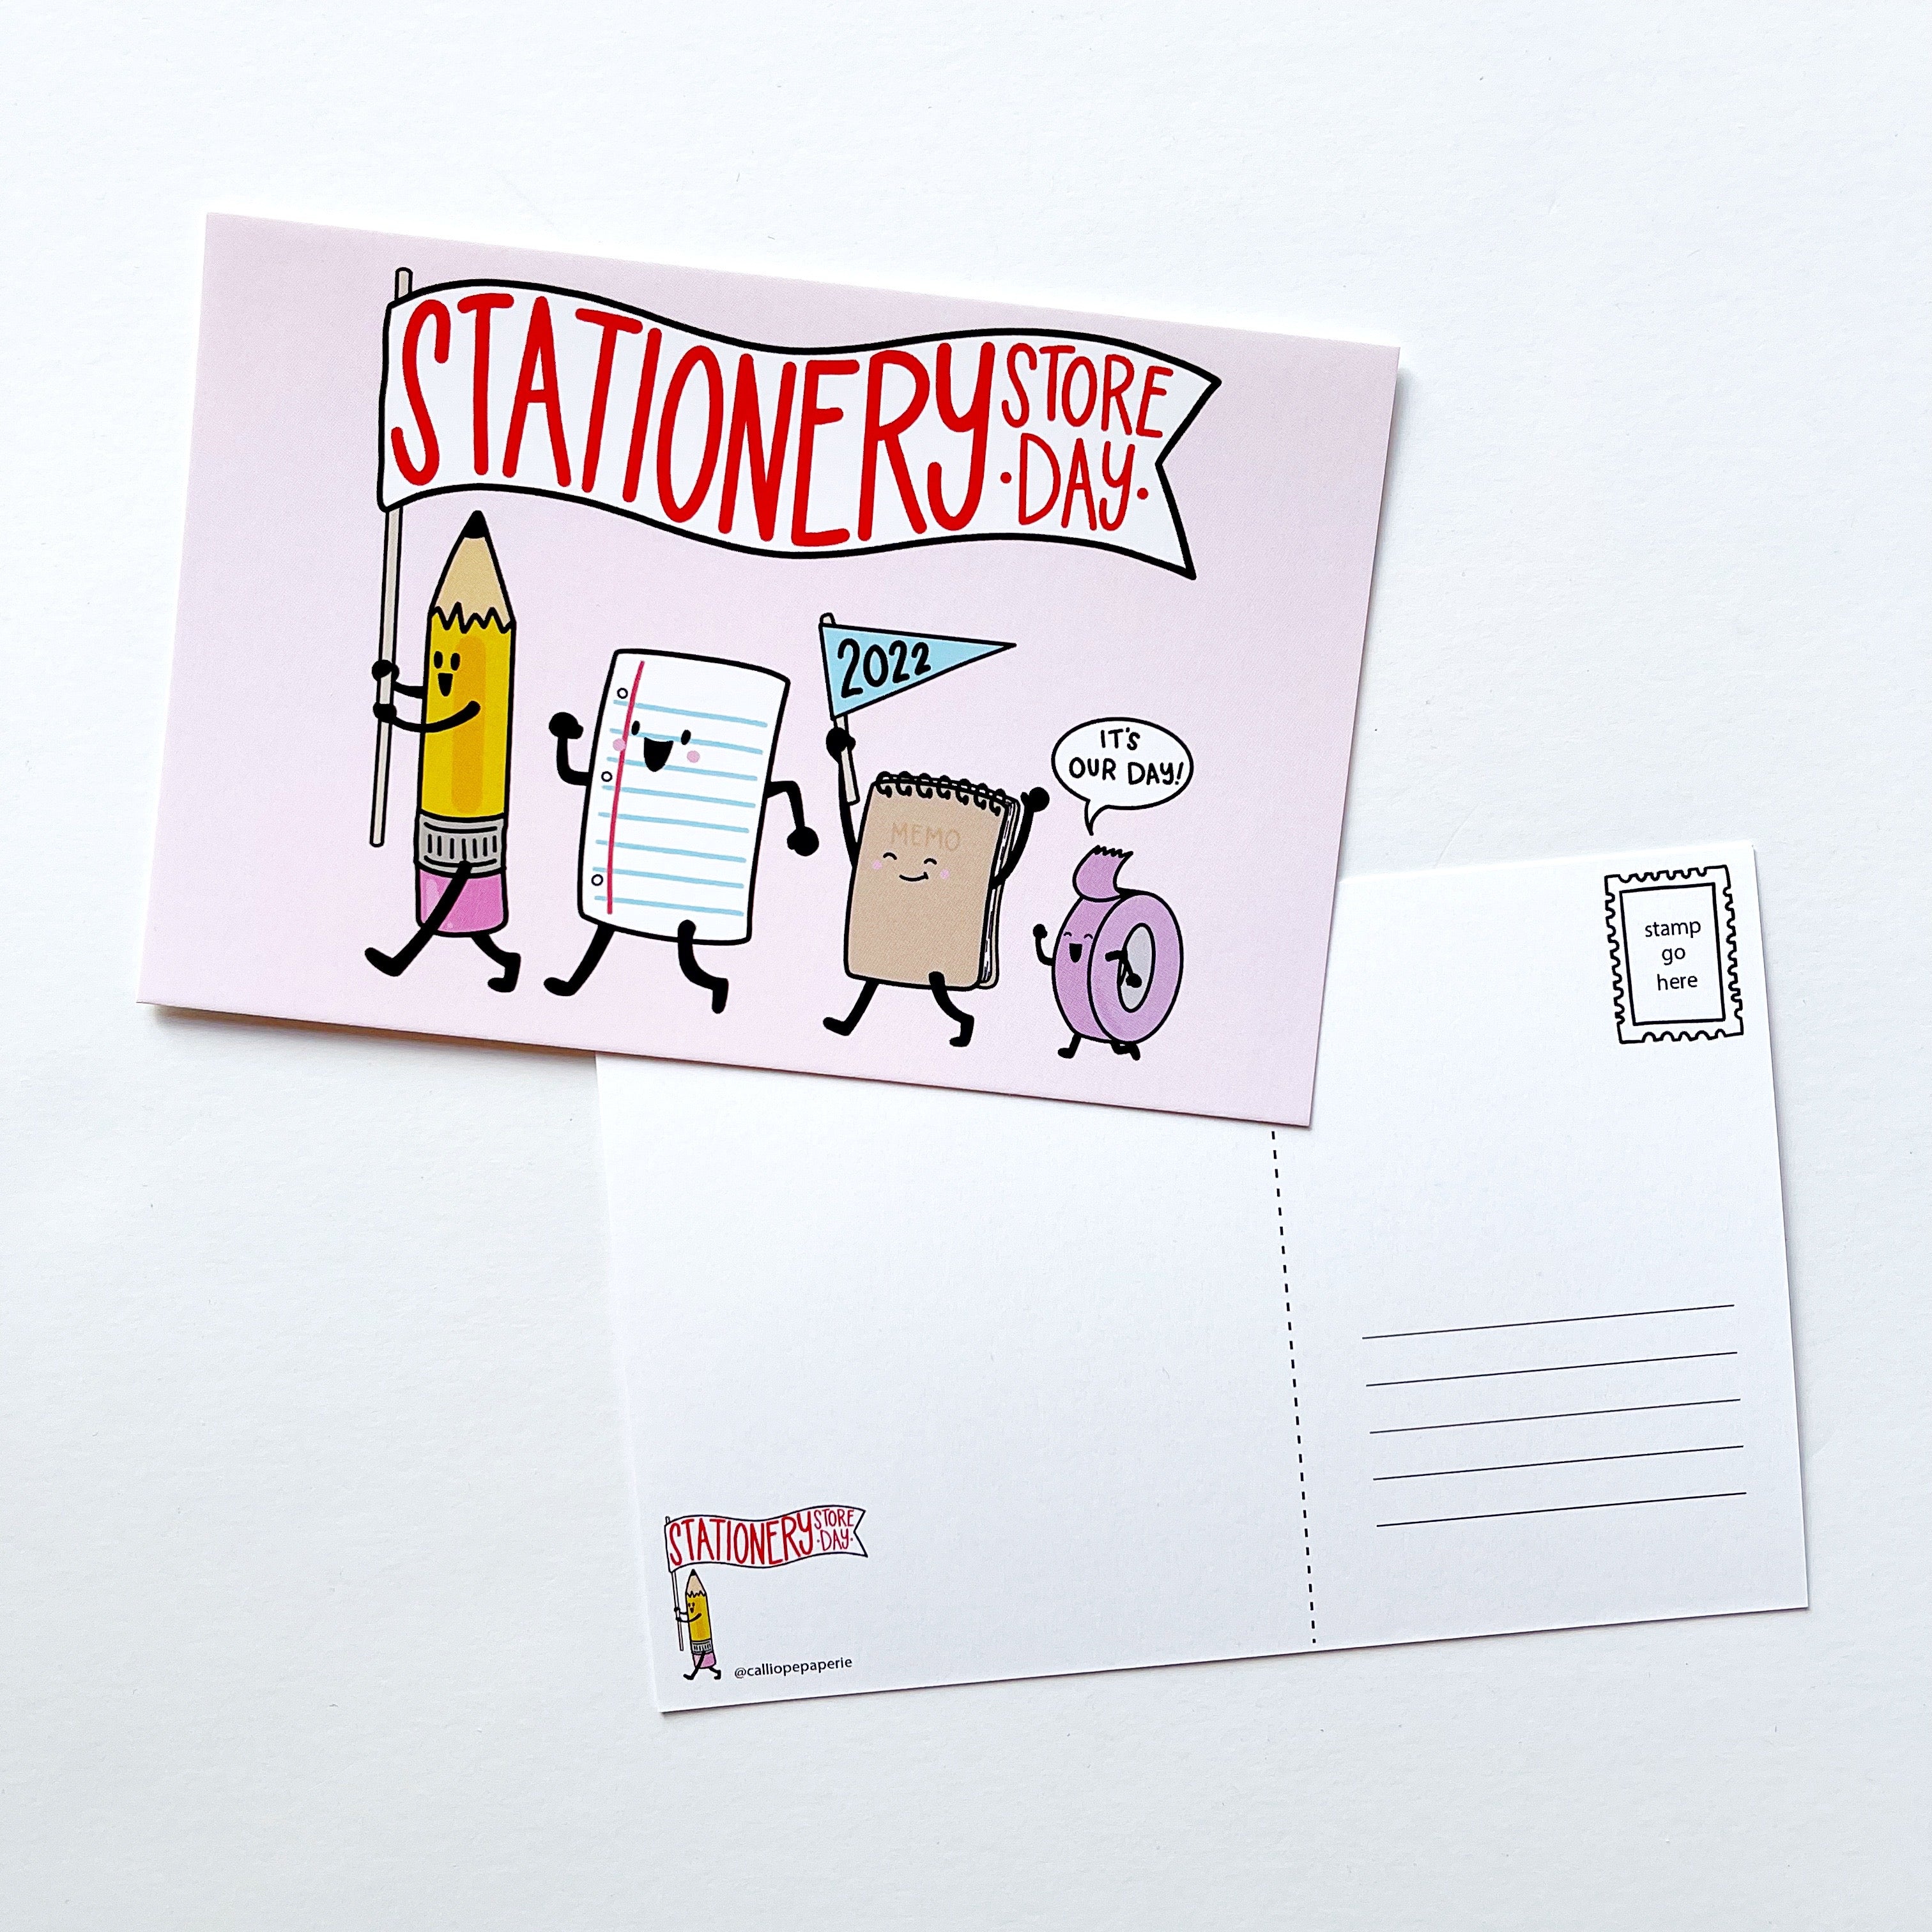 Image of postcard with pink background and images of stationery store day parade of characters, reverse side of postcard has white background and black lines for address on right and blank are on left for messages.